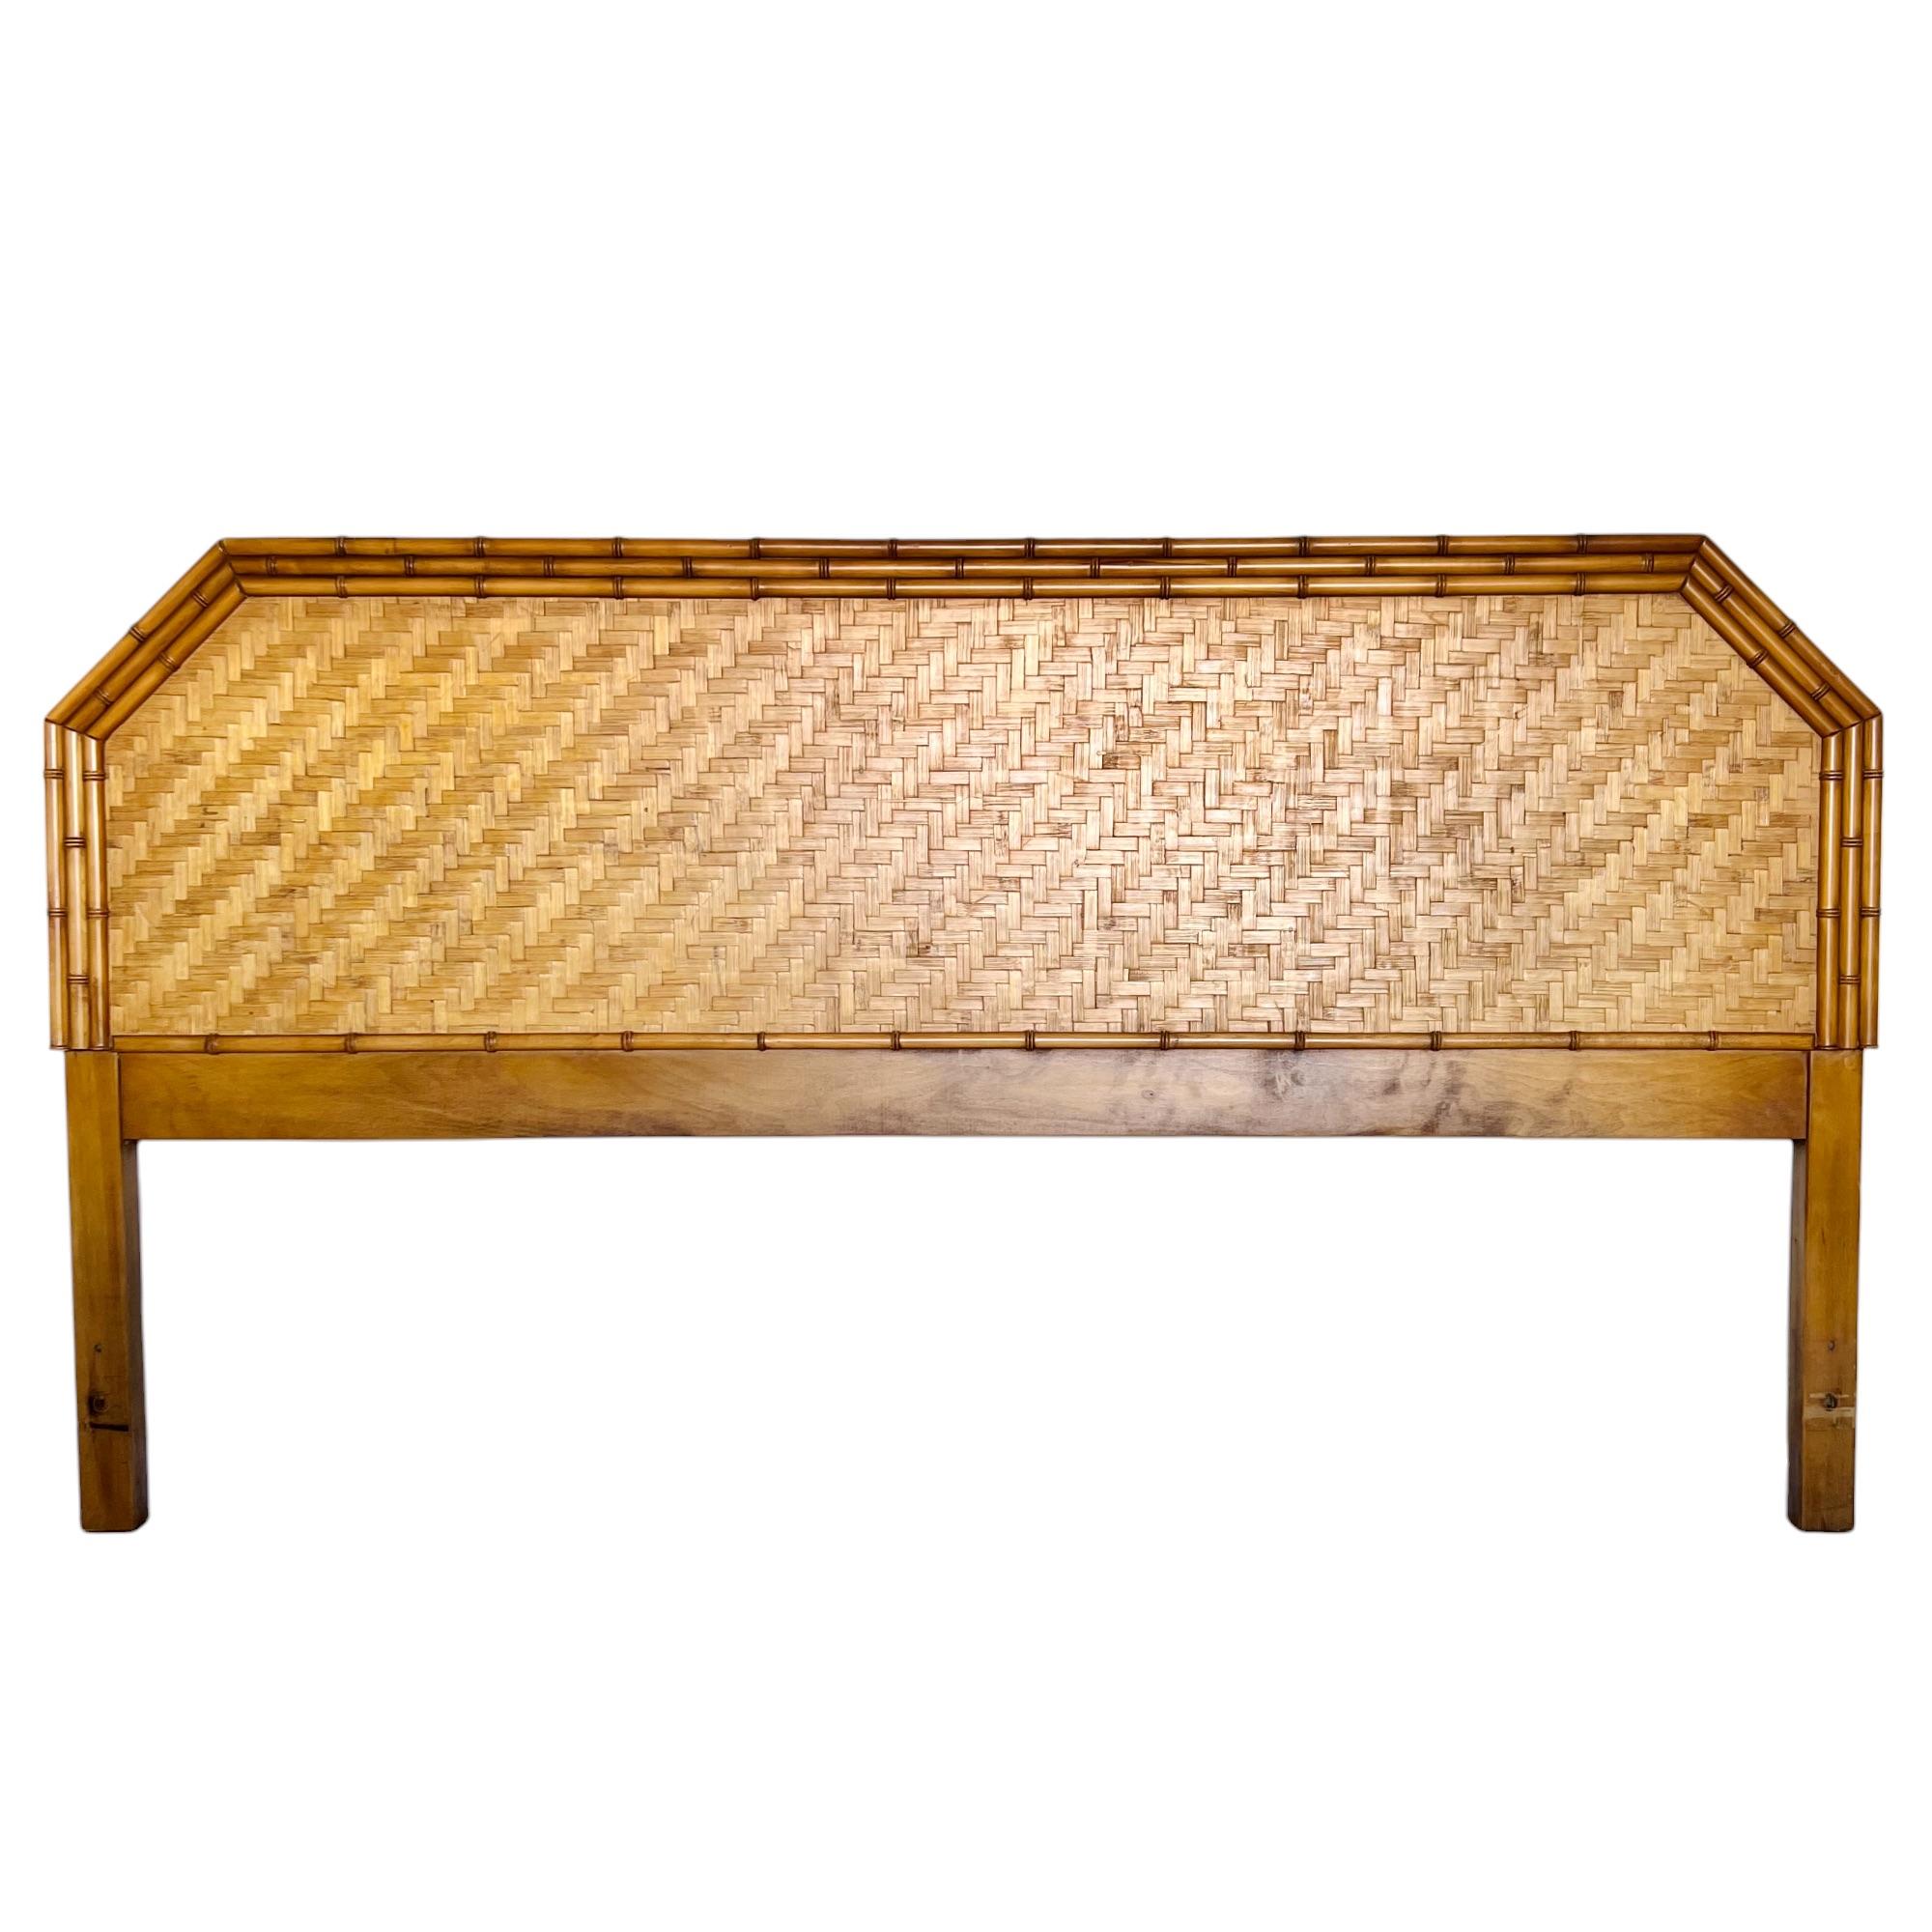 A vintage Palm Beach regency style low king headboard by Dixie Furniture, circa 1965. It features a woven split reed rattan parquetry panel and triple row faux bamboo turned wood framing. 

Dimensions: 80.5